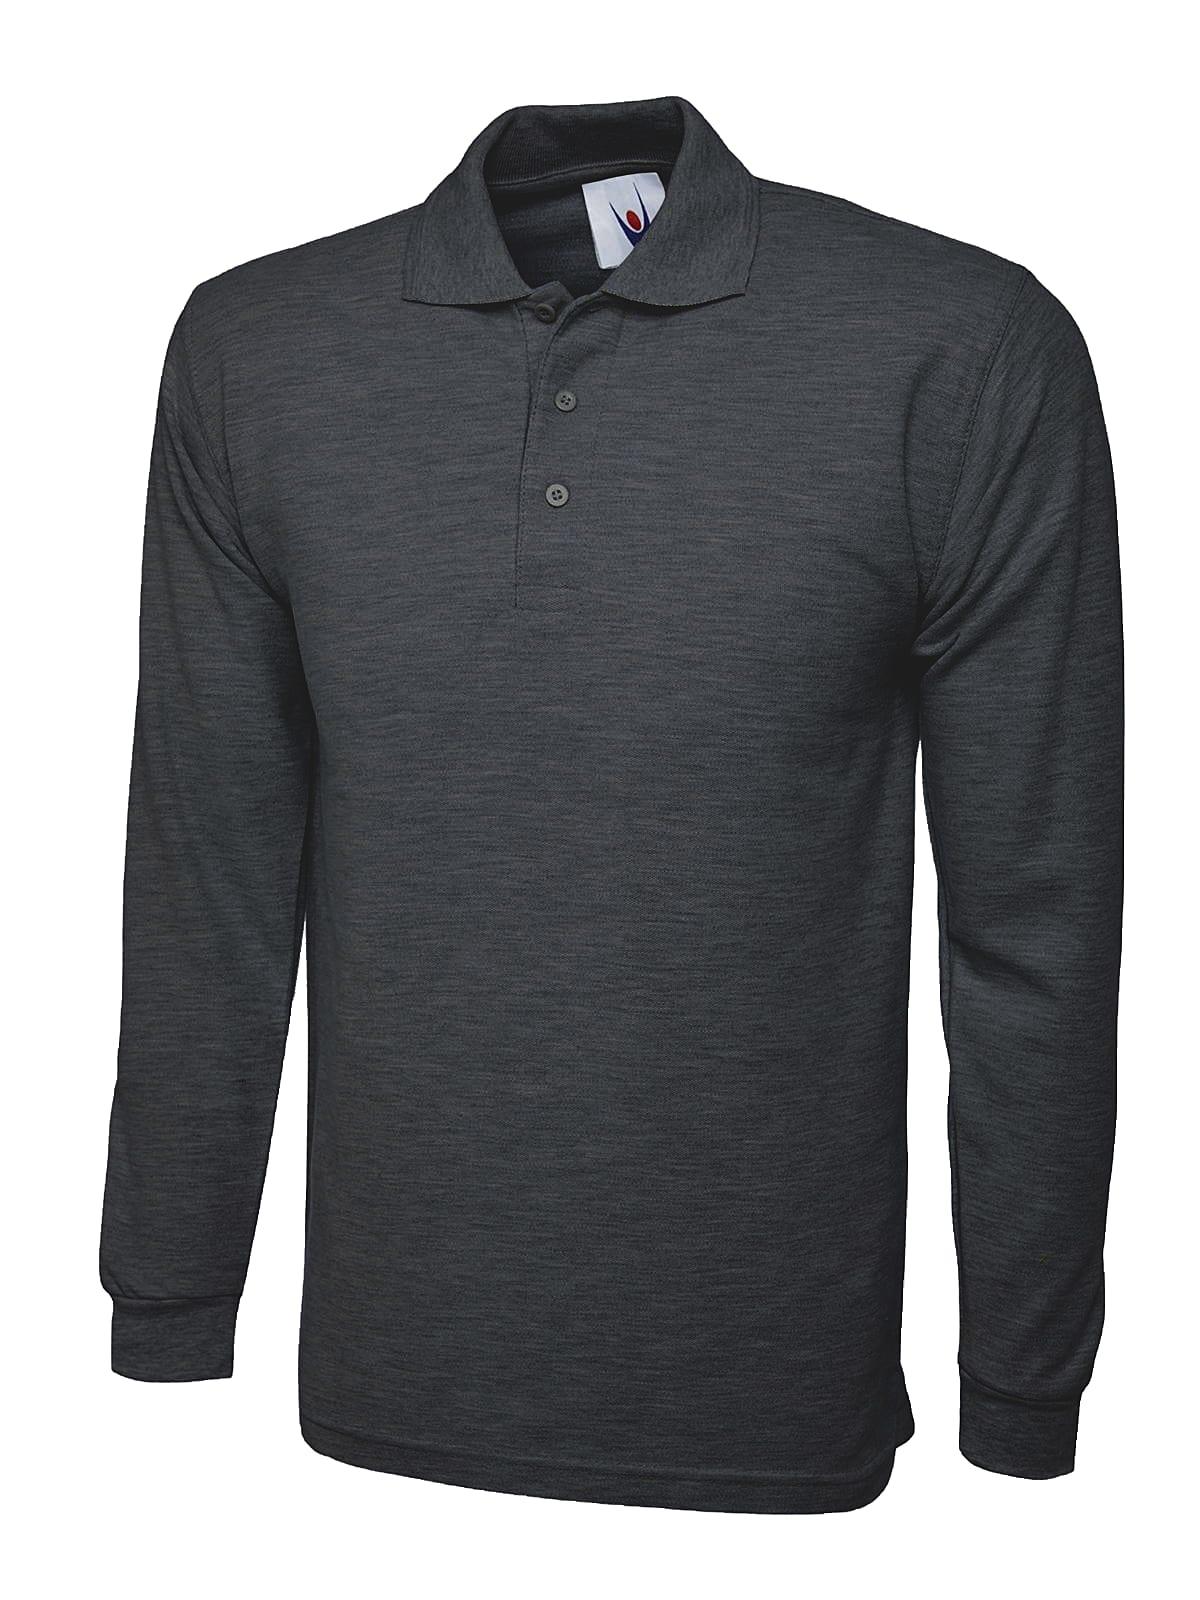 Uneek 220GSM Long-Sleeve Polo Shirt in Charcoal (Product Code: UC113)